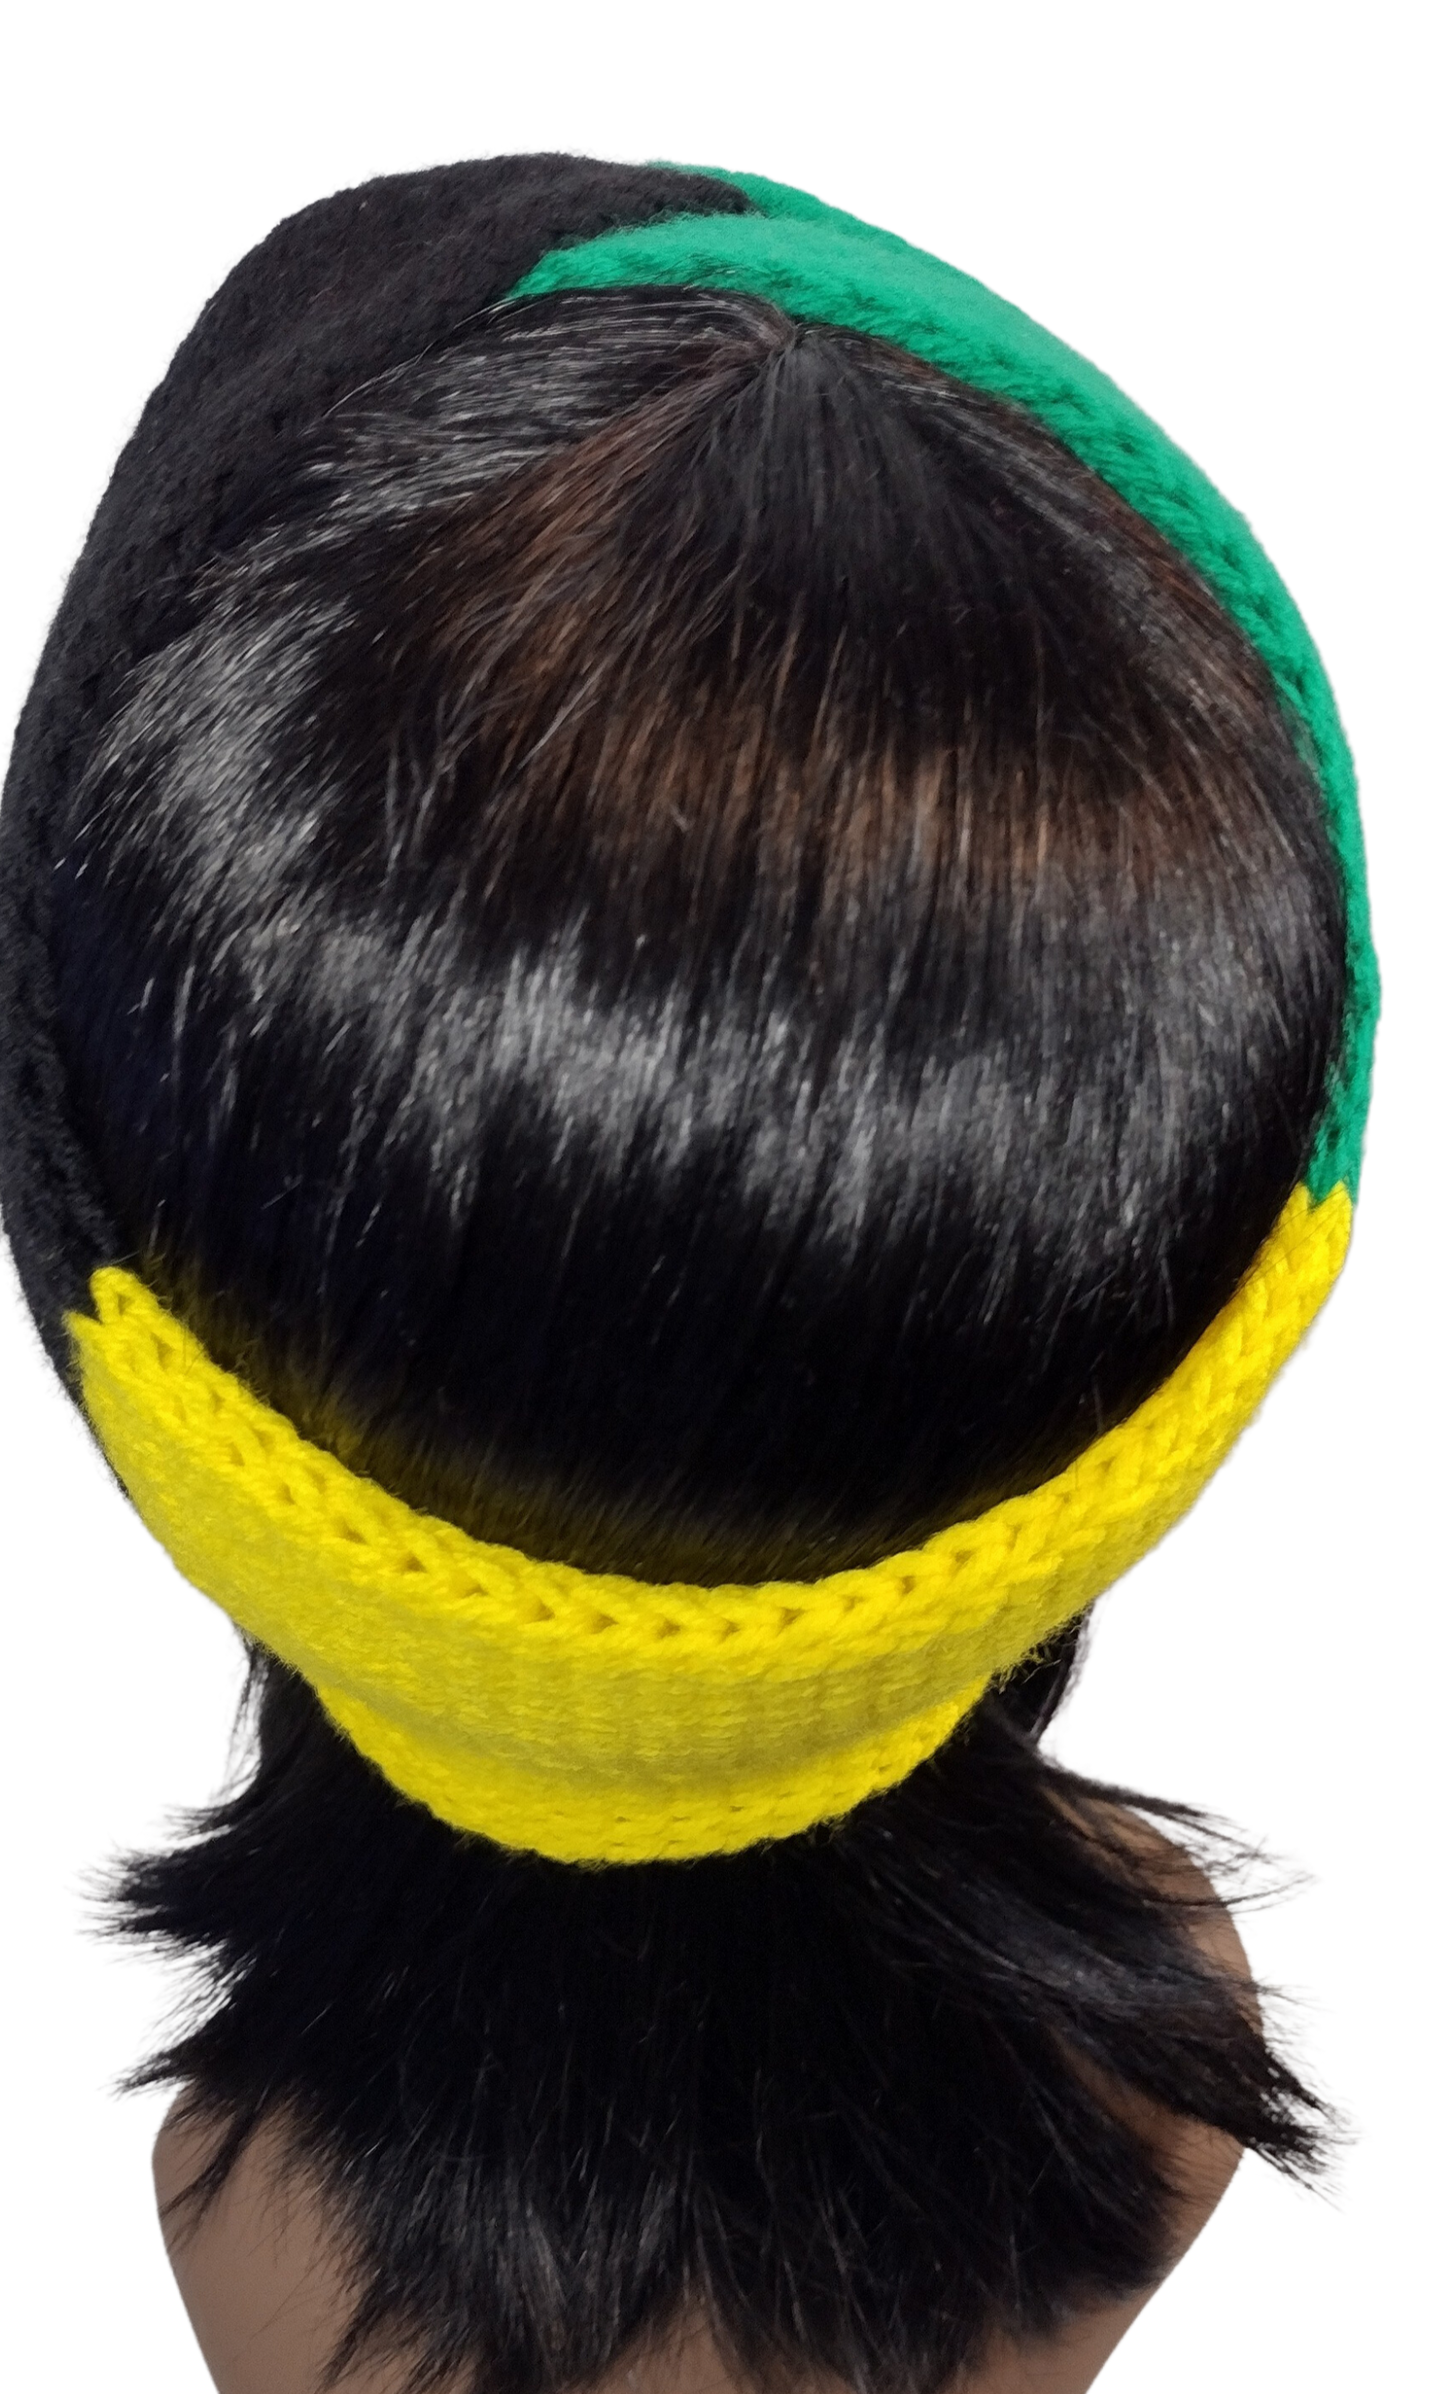 Blk Lotus Co Jamaican Colored Twist Knit Headband: Vibrant Style Meets Cozy Warmth